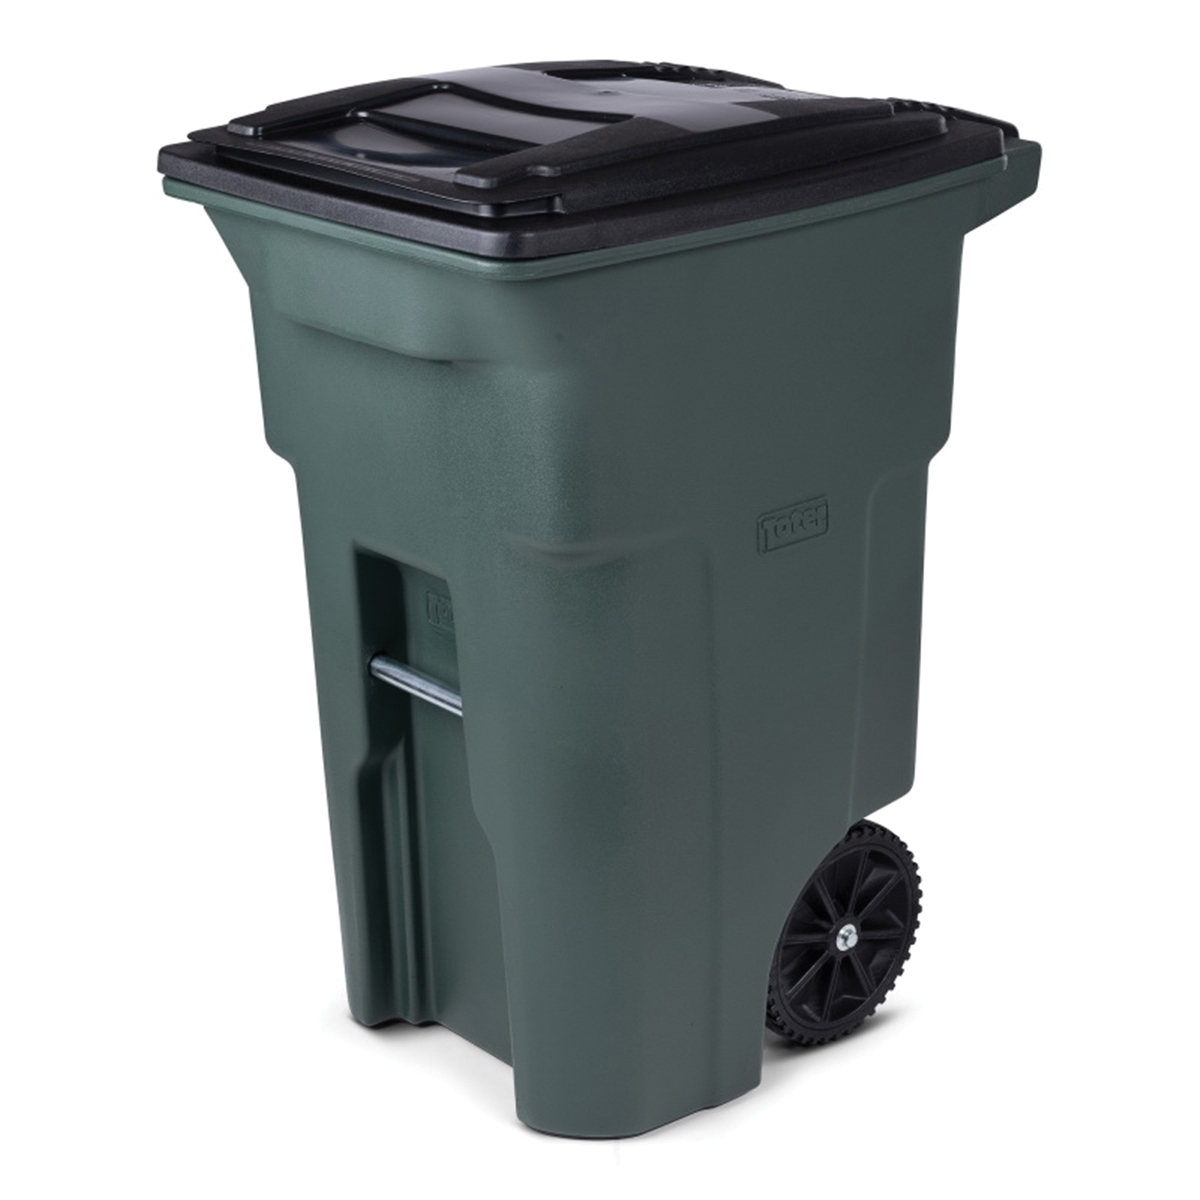 79296-R2968 Trash Can with Wheels and Attached Lid, 96 gal Capacity, Polyethylene, Greenstone, Lid Closure